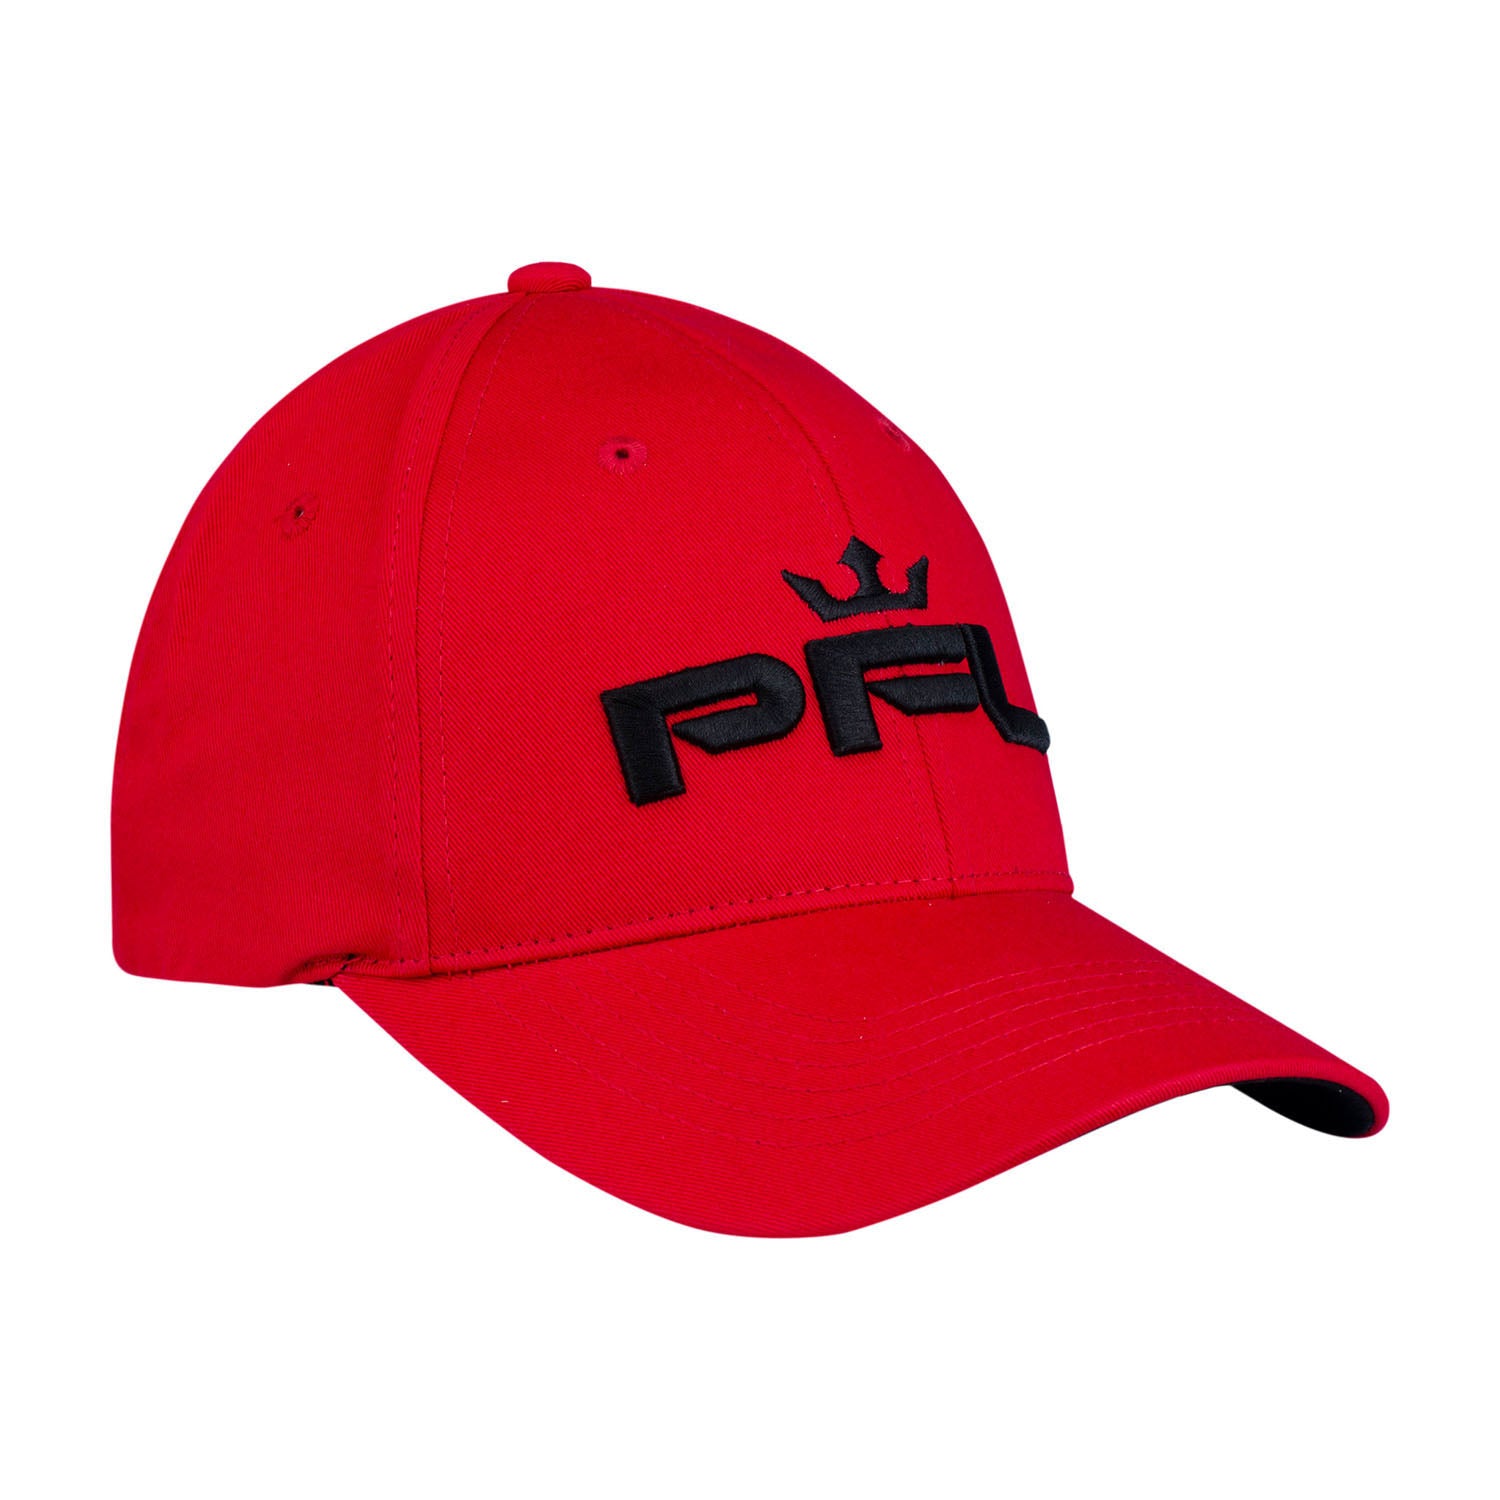 PFL Walkout Hat in Red - Left Side View